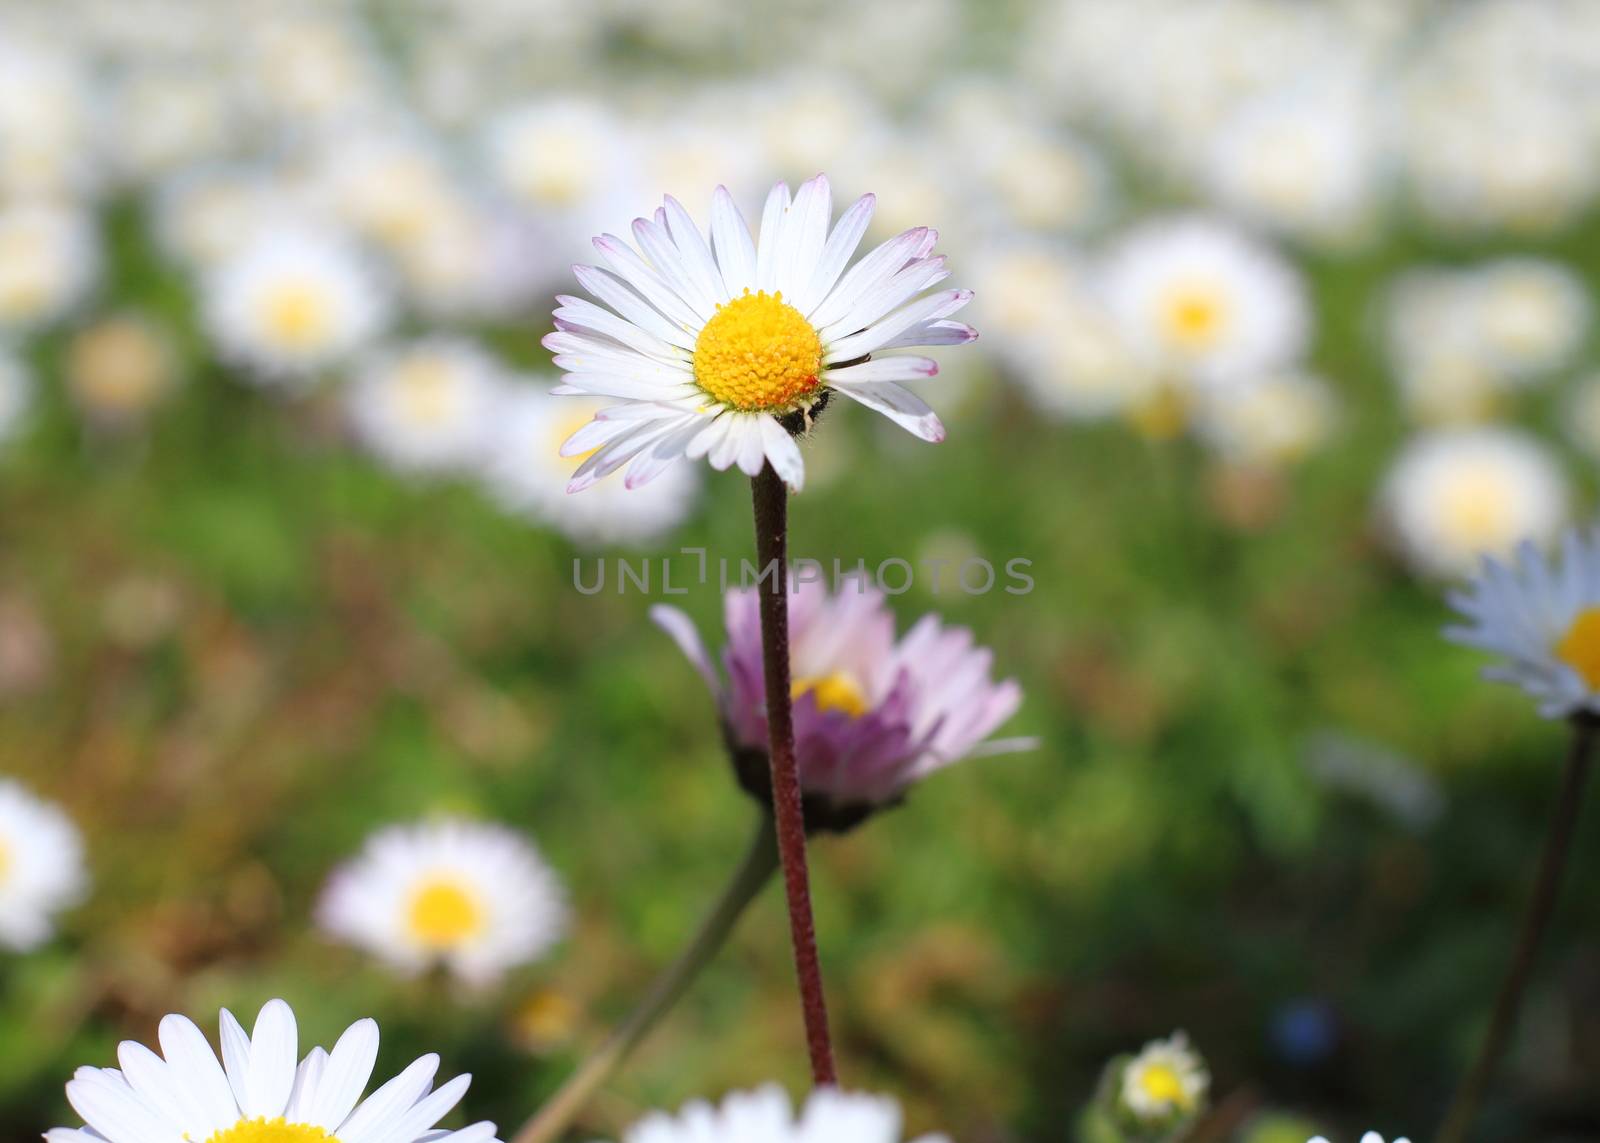 expanse of many daisies in the countryside by riccardofe